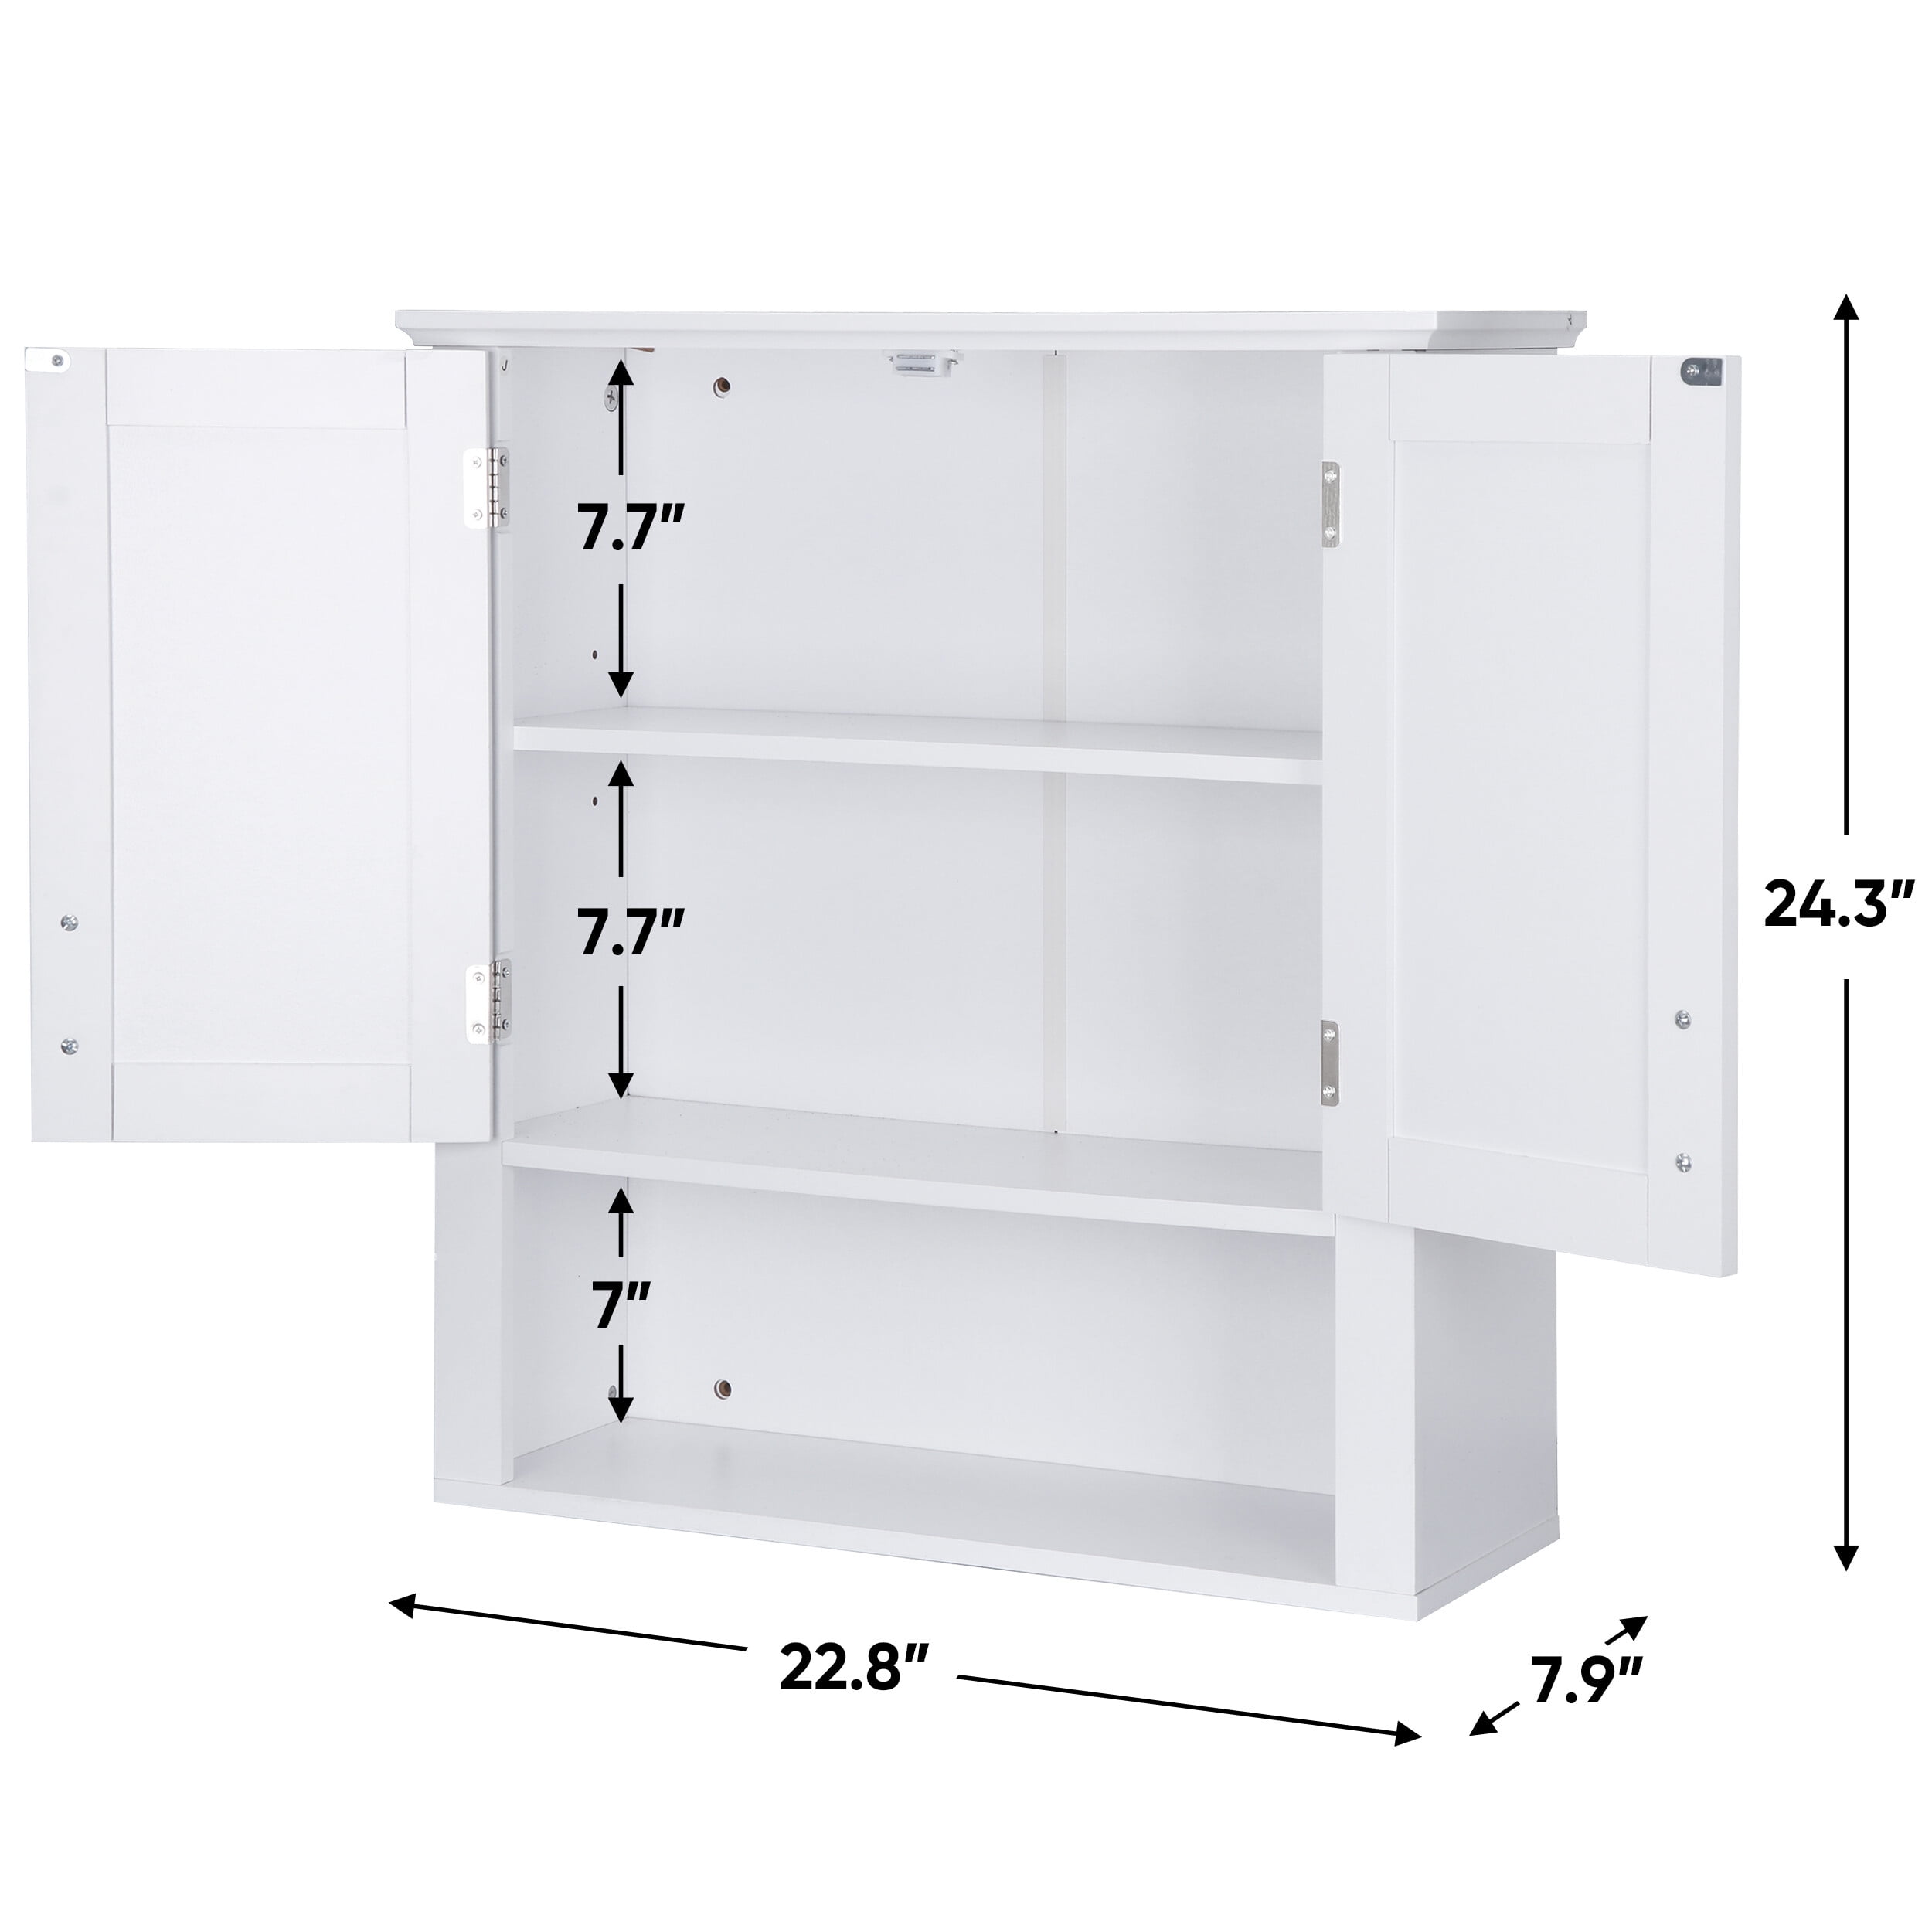 Basicwise QI004608.WT Wall Mount Bathroom Cabinet Wooden Medicine Cabinet Storage Organizer Double Door with 2 Shelves, and Open Display Shelf, White